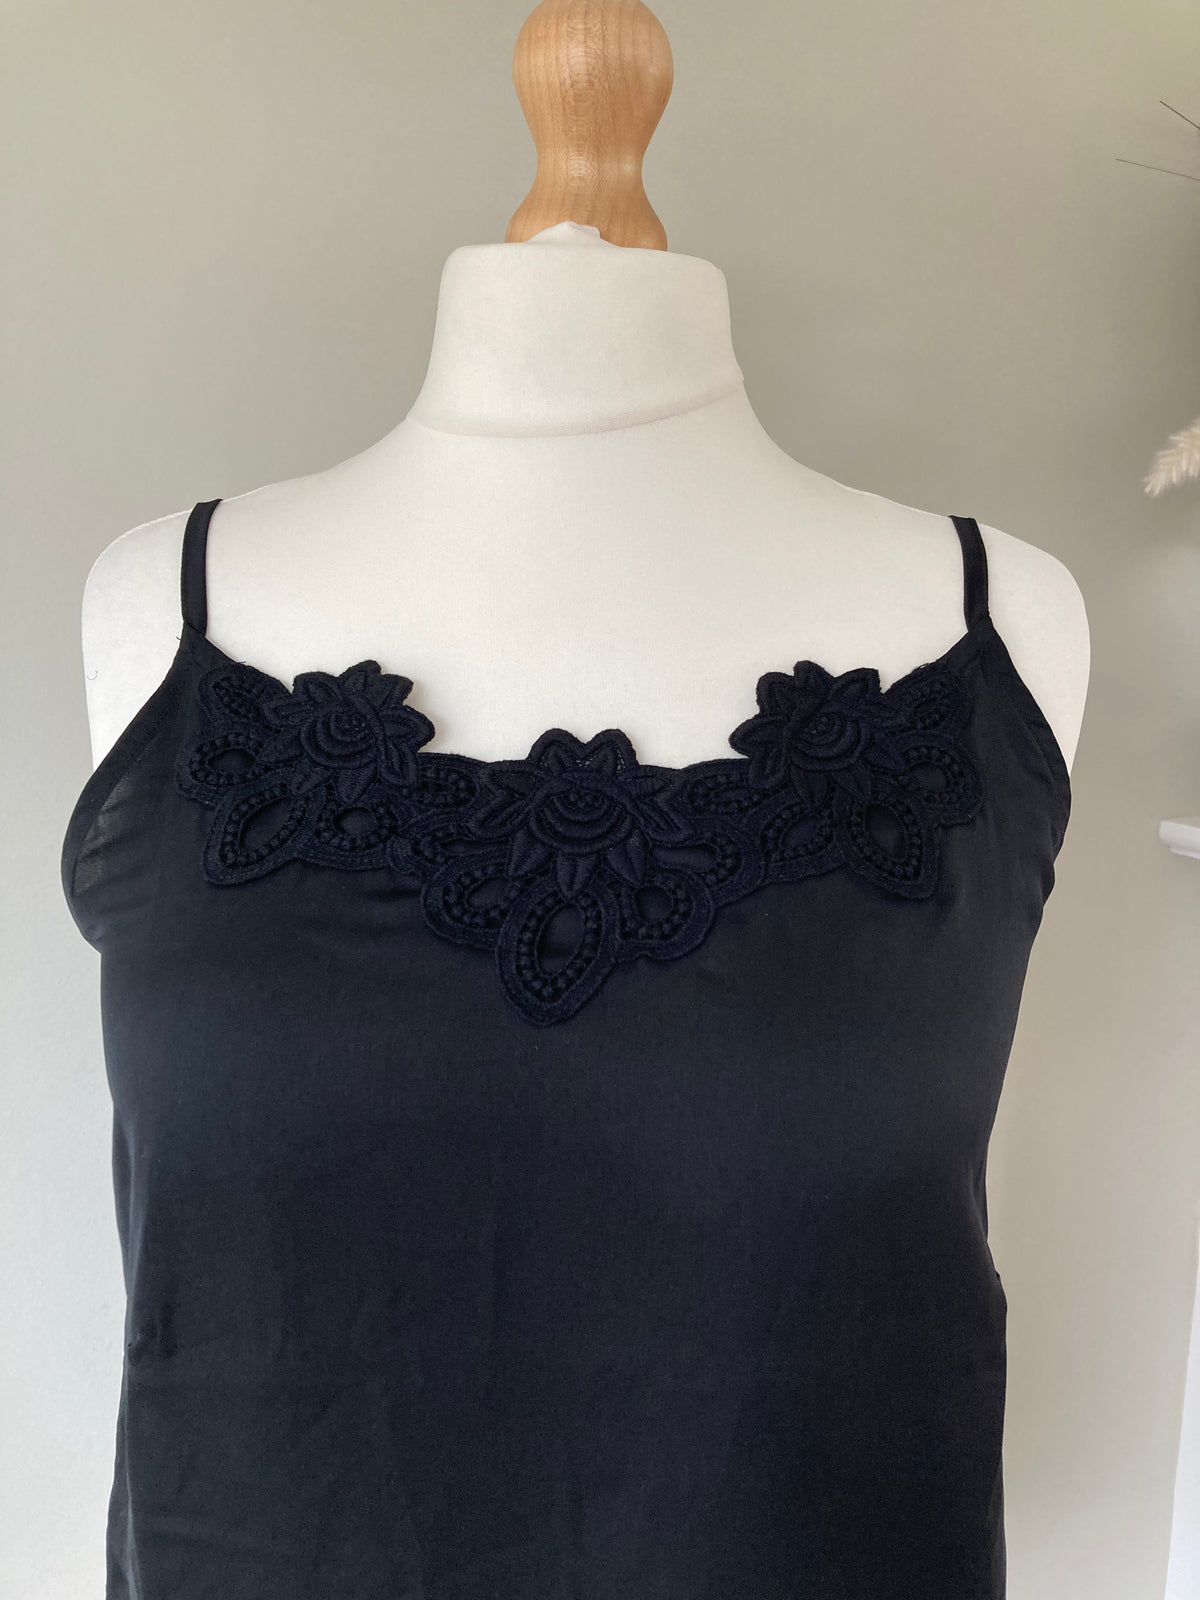 Black night top by FAIRLADY - Size 16